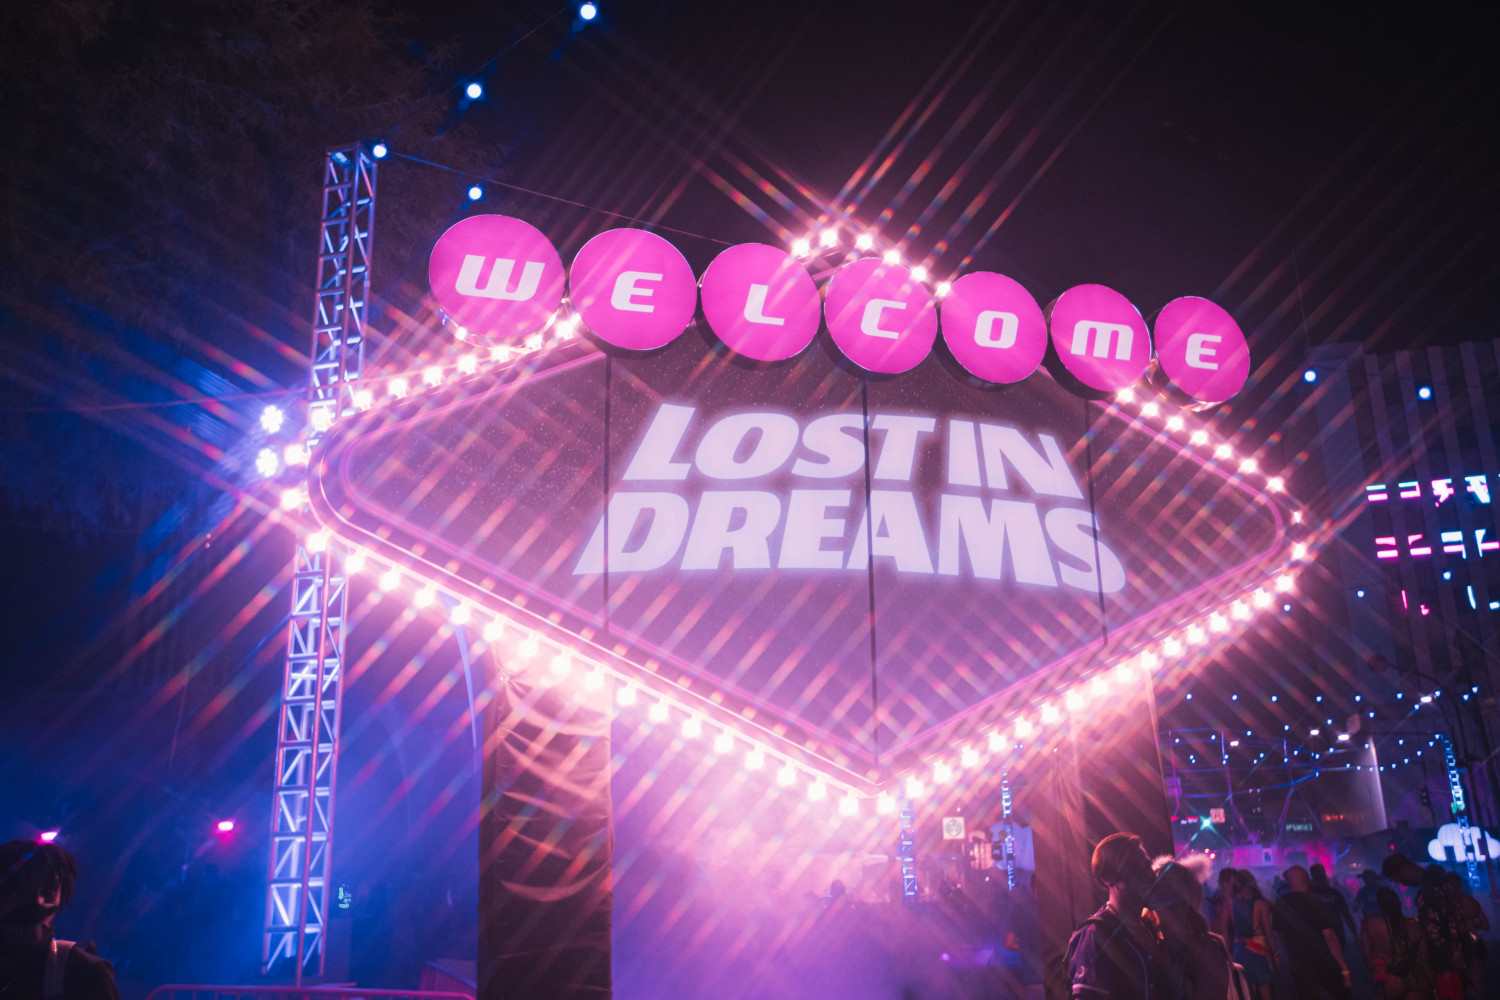 Insomniac's First Lost In Dreams Festival Turned Las Vegas Into A Melodic Dreamscape Feat Seven Lions, Elephante, Dabin, and More